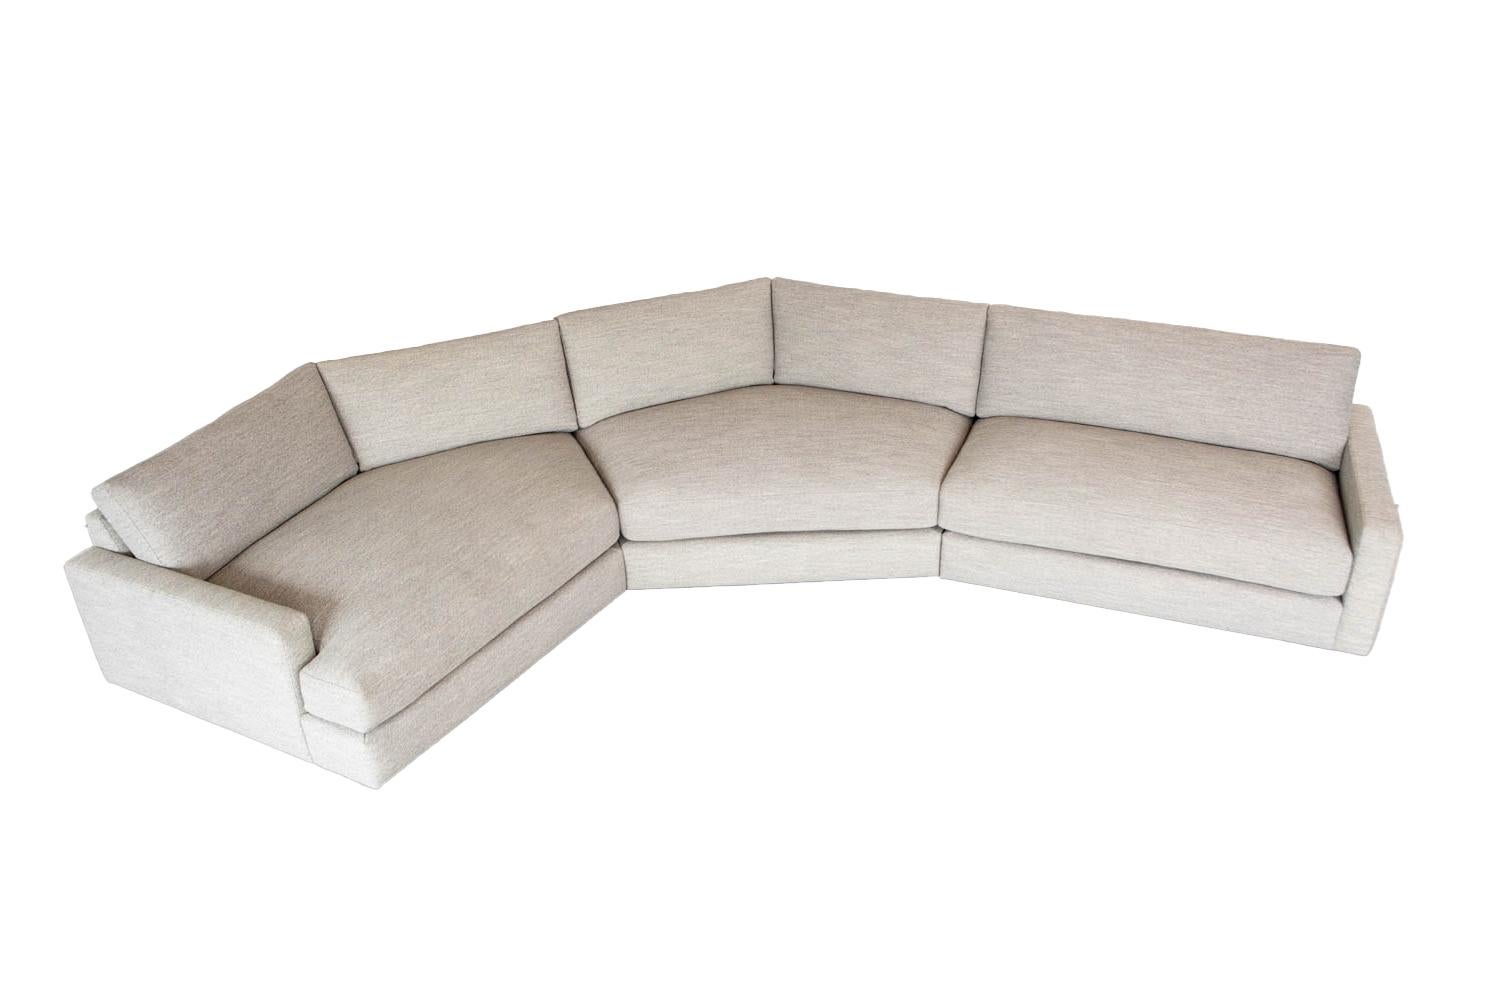 Comfortable and cleaned lined West Coast Sectional - the Coasty! If this sectional is not in the right orientation, let us know and we can have another built in the opposite orientation or adjust the dimensions to fit your needs. 

Top-stitching